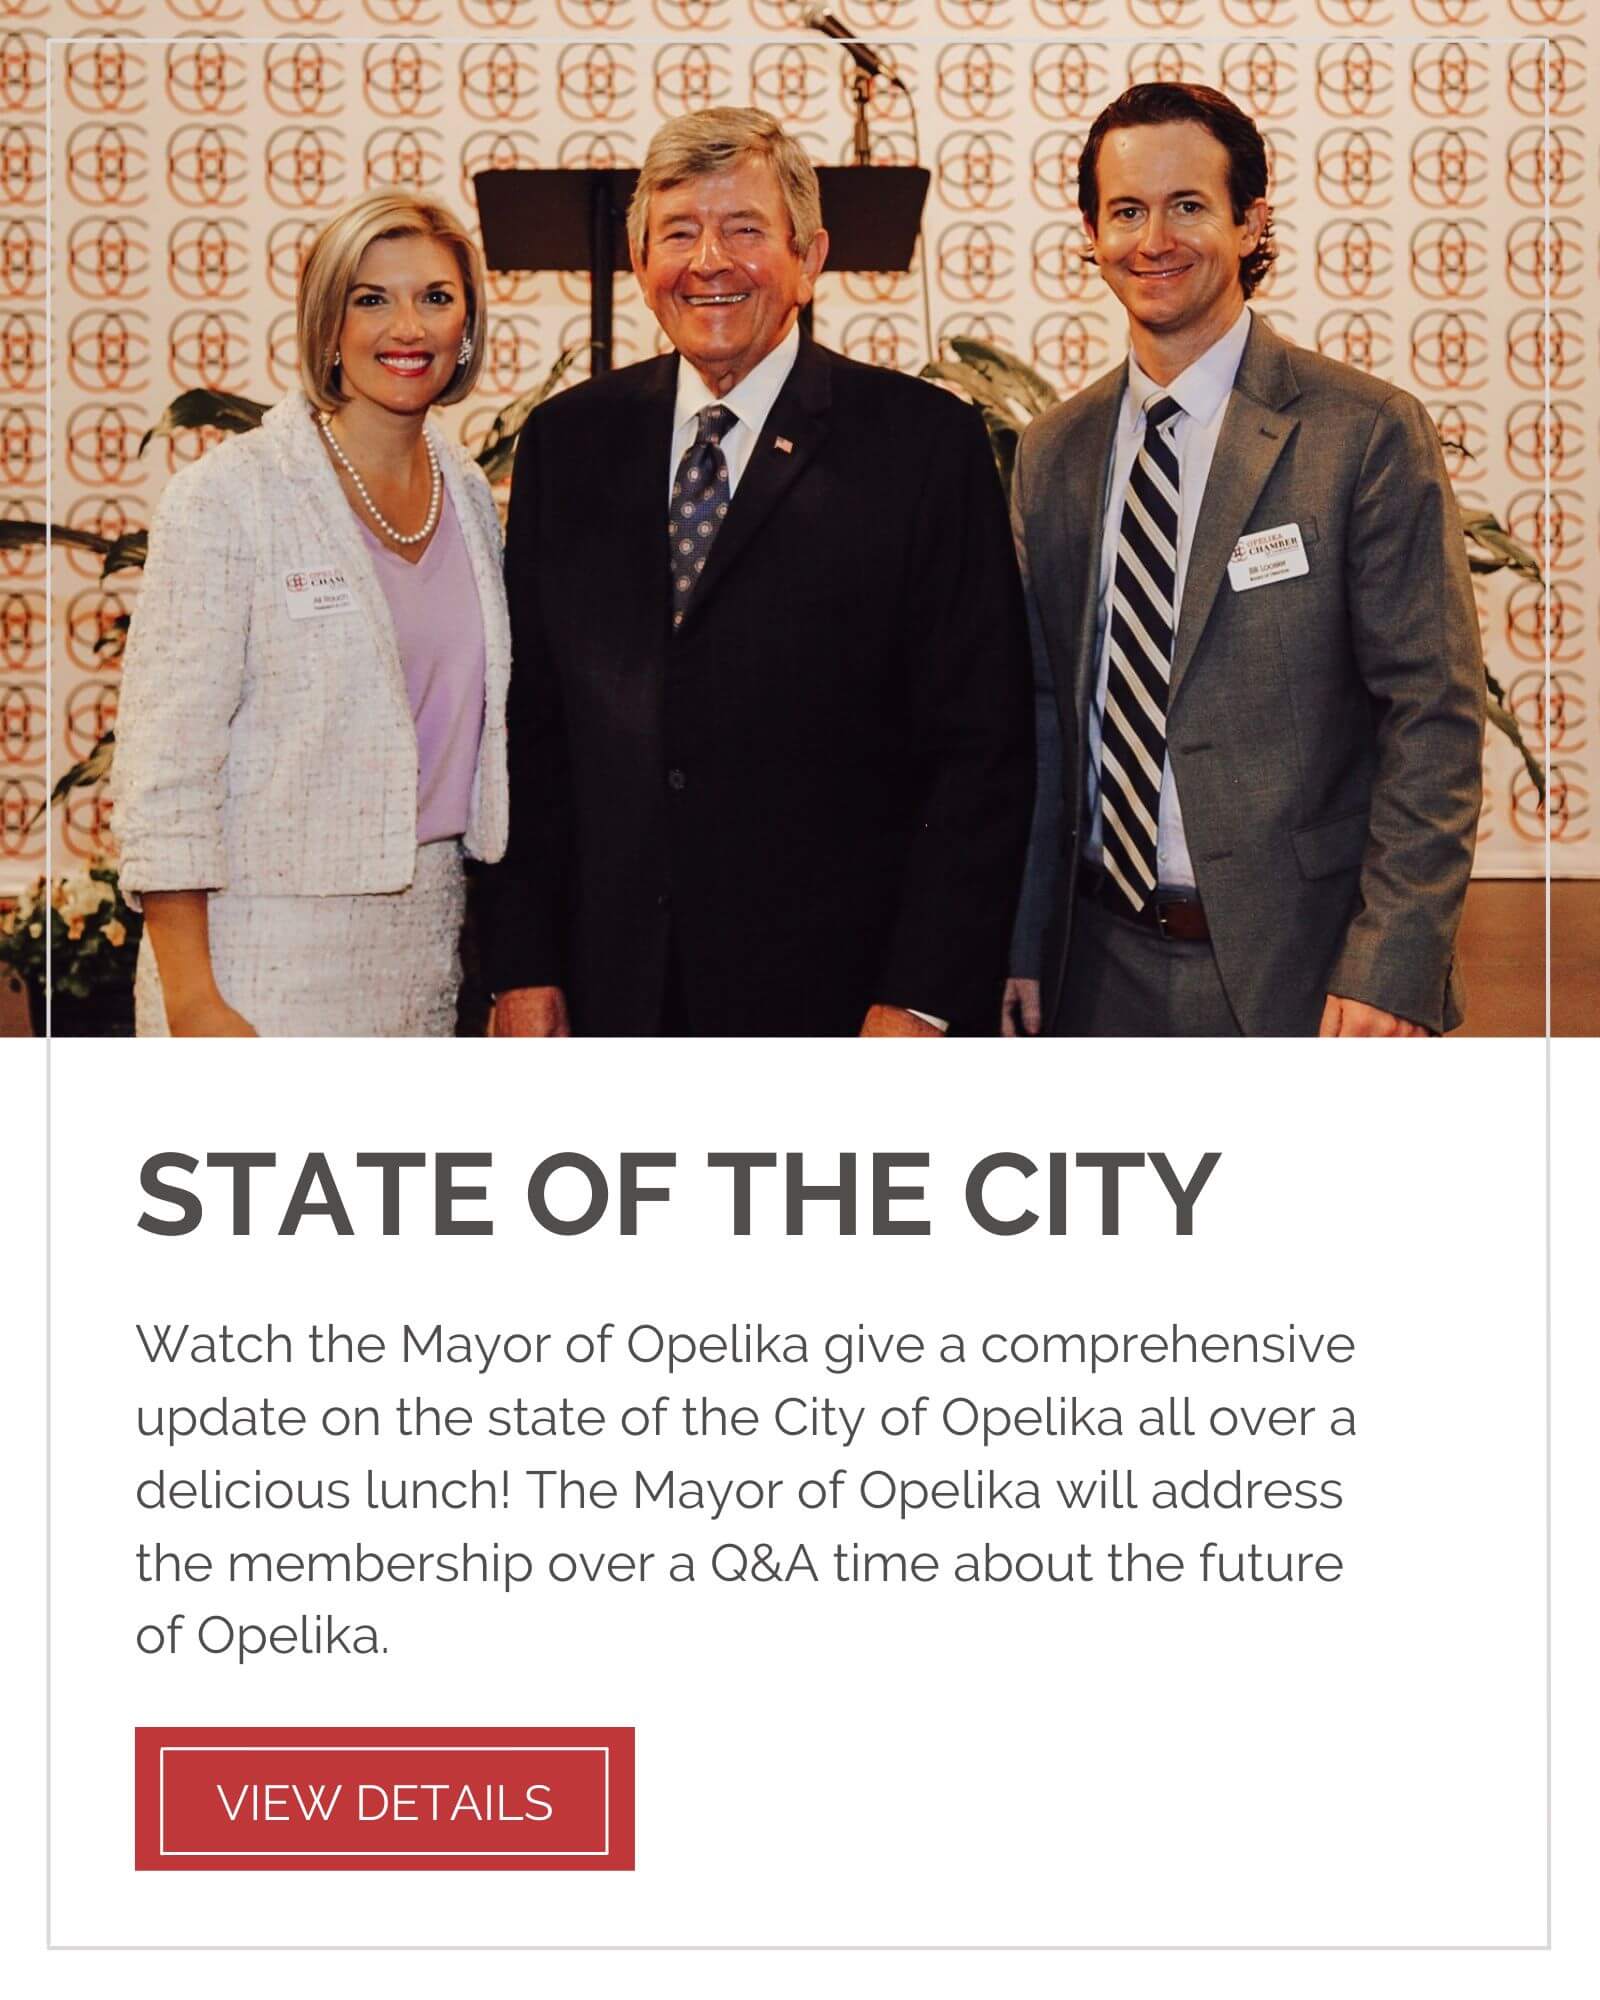 State of the City Premier Event